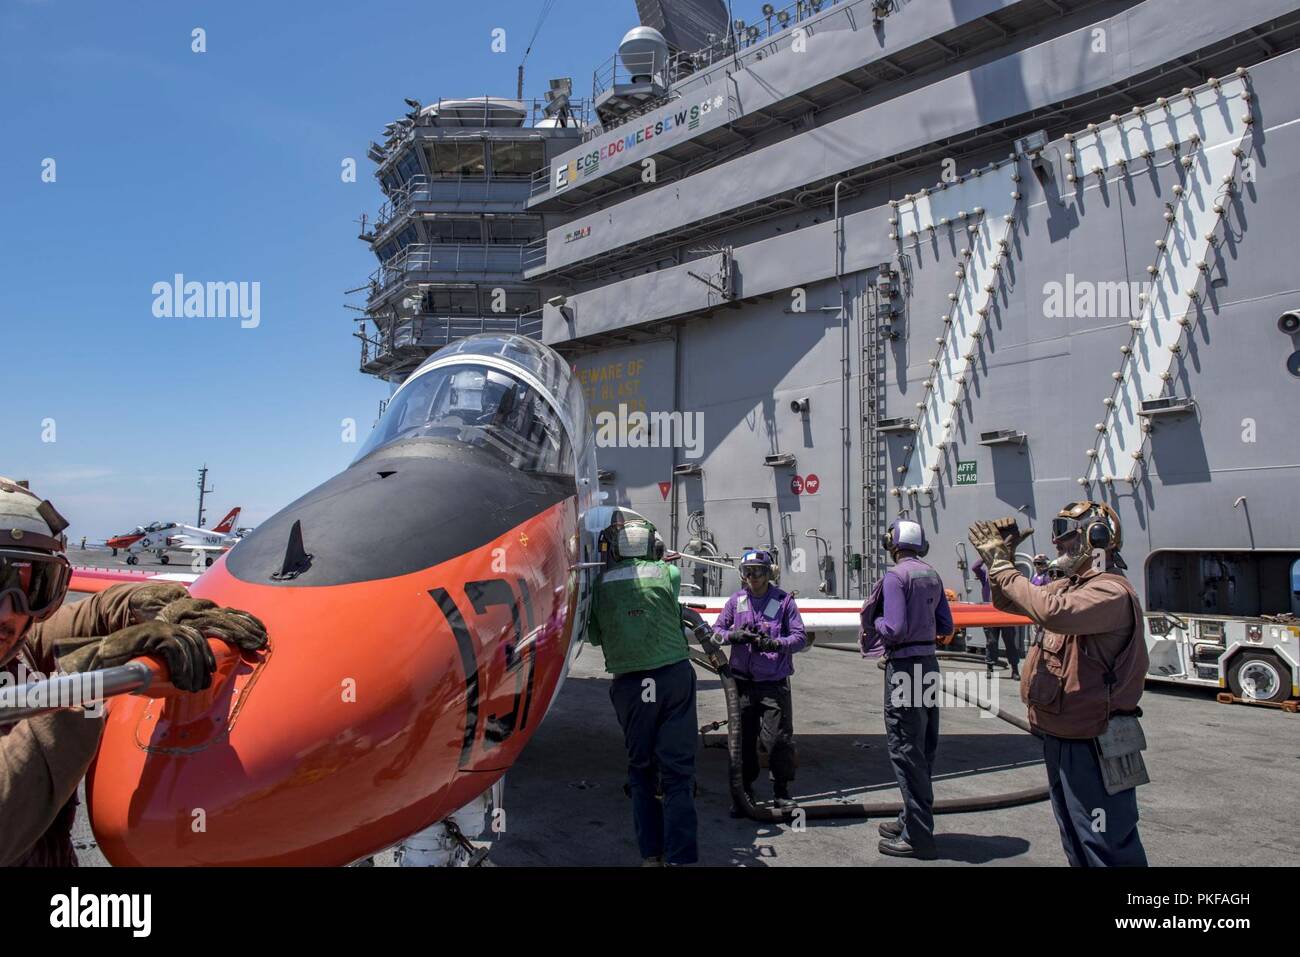 ATLANTIC OCEAN (Aug. 9, 2018) A T-45C Goshawk attached to Training Air Wing 1 refuels on the aircraft carrier USS George H.W. Bush (CVN 77). The ship is underway conducting routine training exercises to maintain carrier readiness. Stock Photo